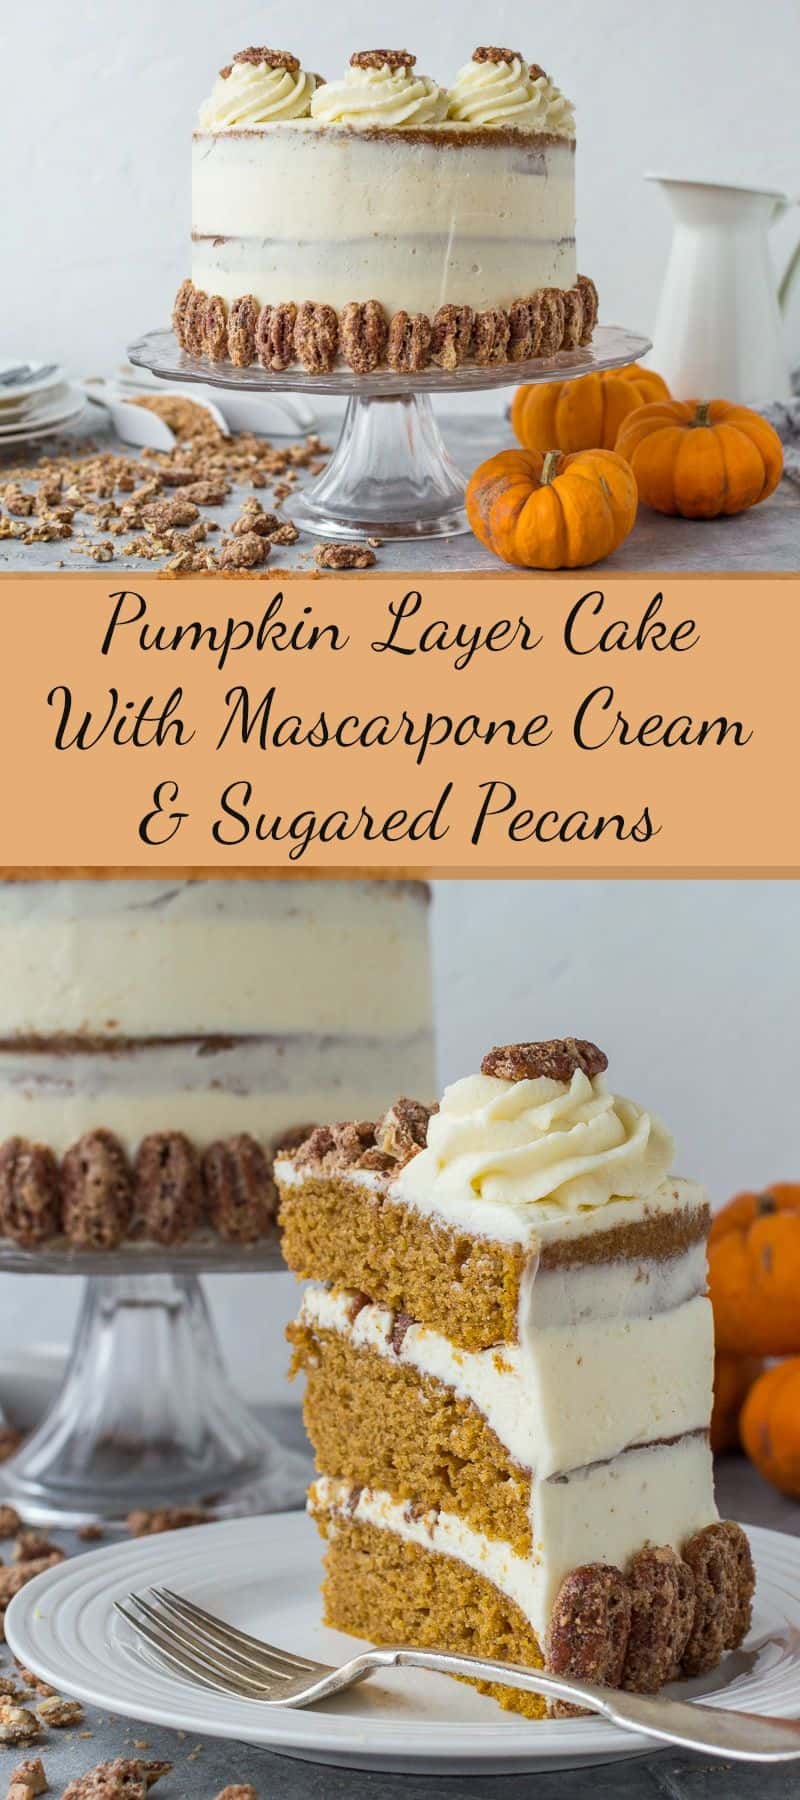 Pumpkin layer cake with mascarpone cream and sugared pecans feature